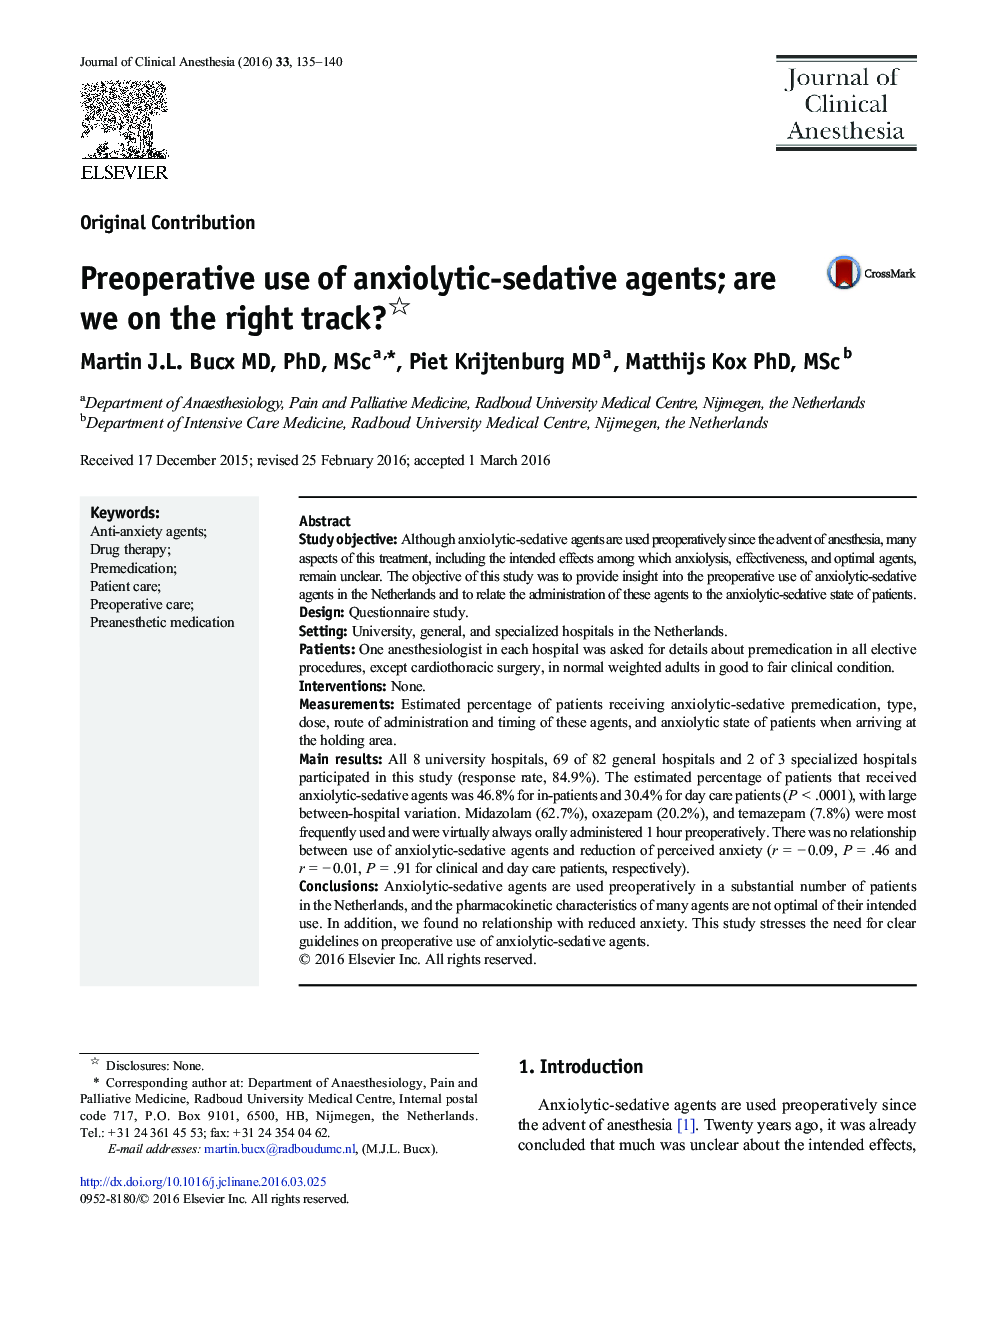 Preoperative use of anxiolytic-sedative agents; are we on the right track? 